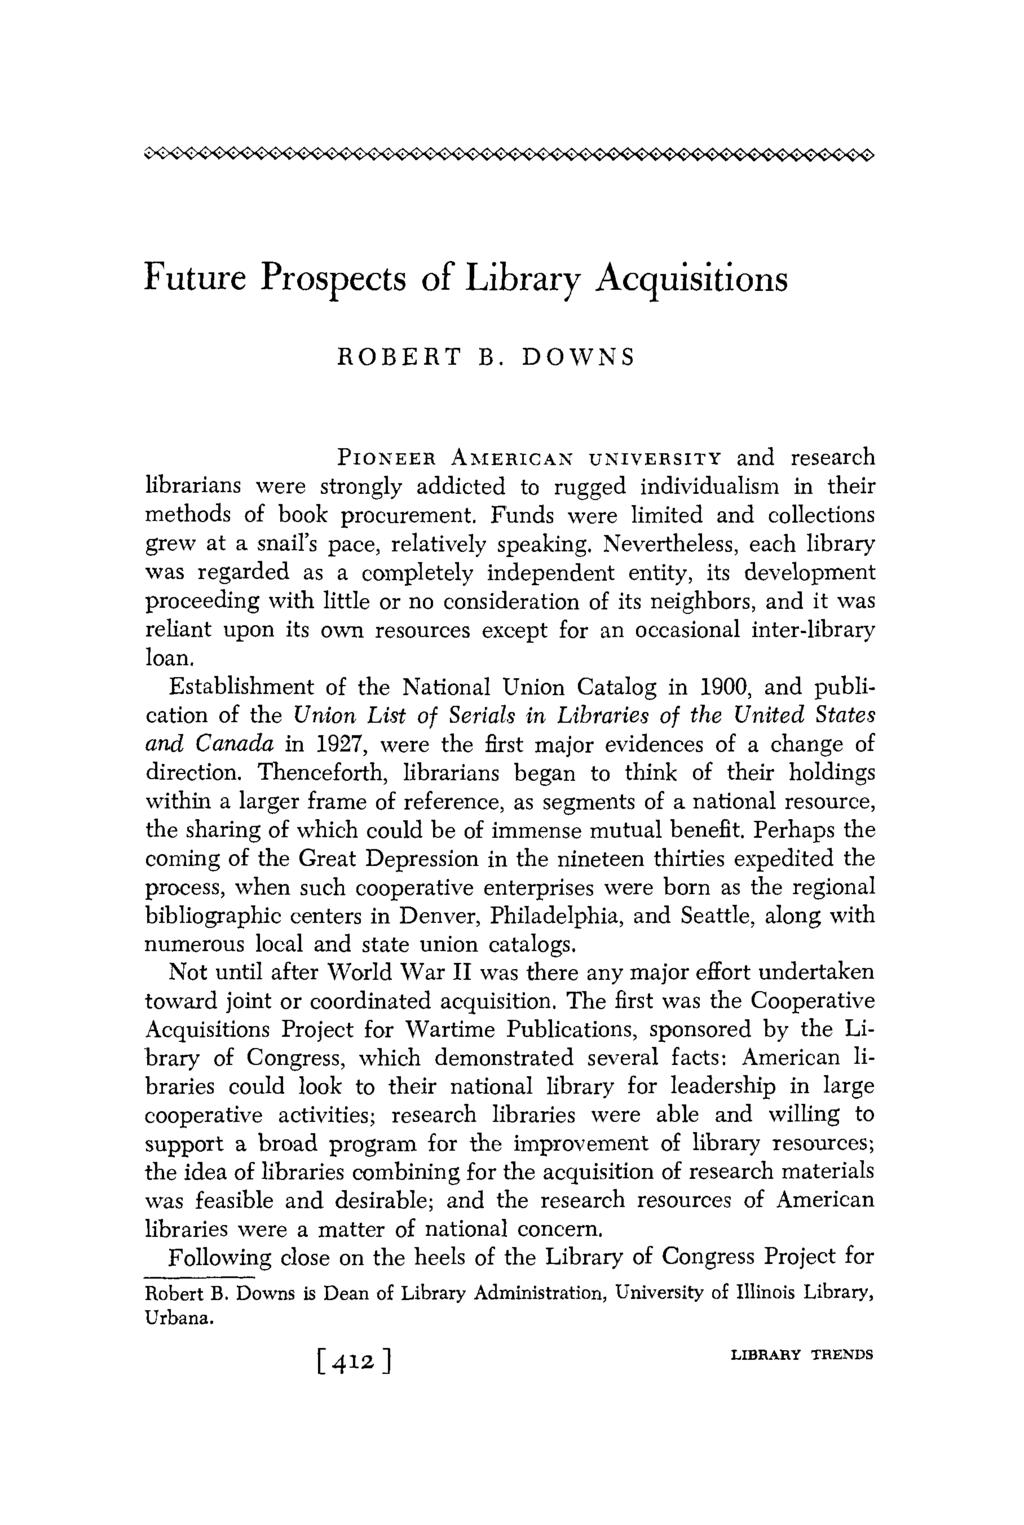 Future Prospects of Library Acquisitions ROBERT B. DOWNS PIONEERAMERICANUNIVERSITY and research librarians were strongly addicted to rugged individualism in their methods of book procurement.